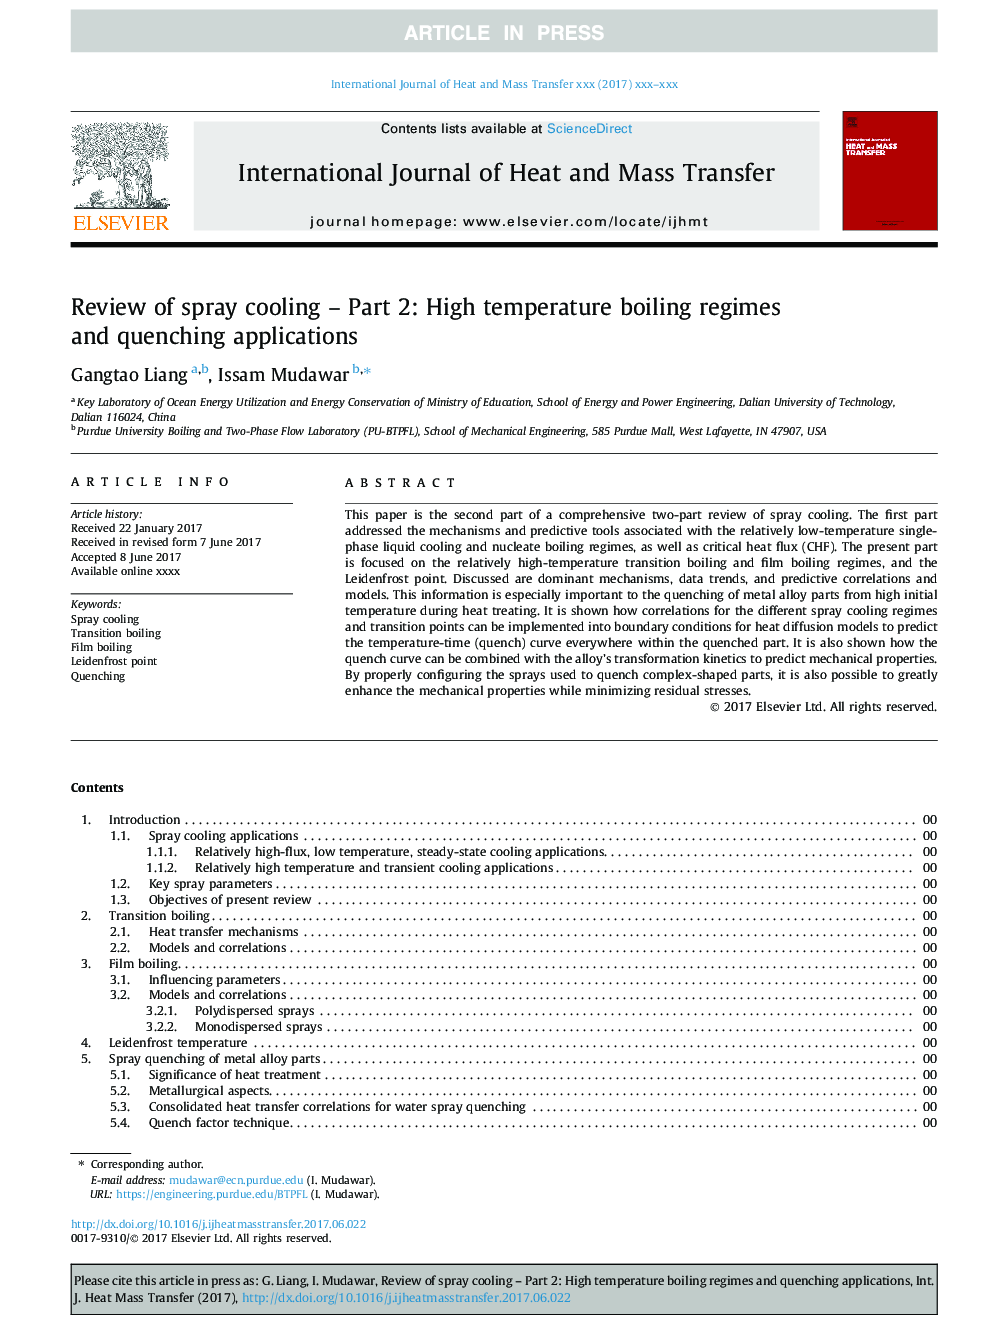 Review of spray cooling - Part 2: High temperature boiling regimes and quenching applications